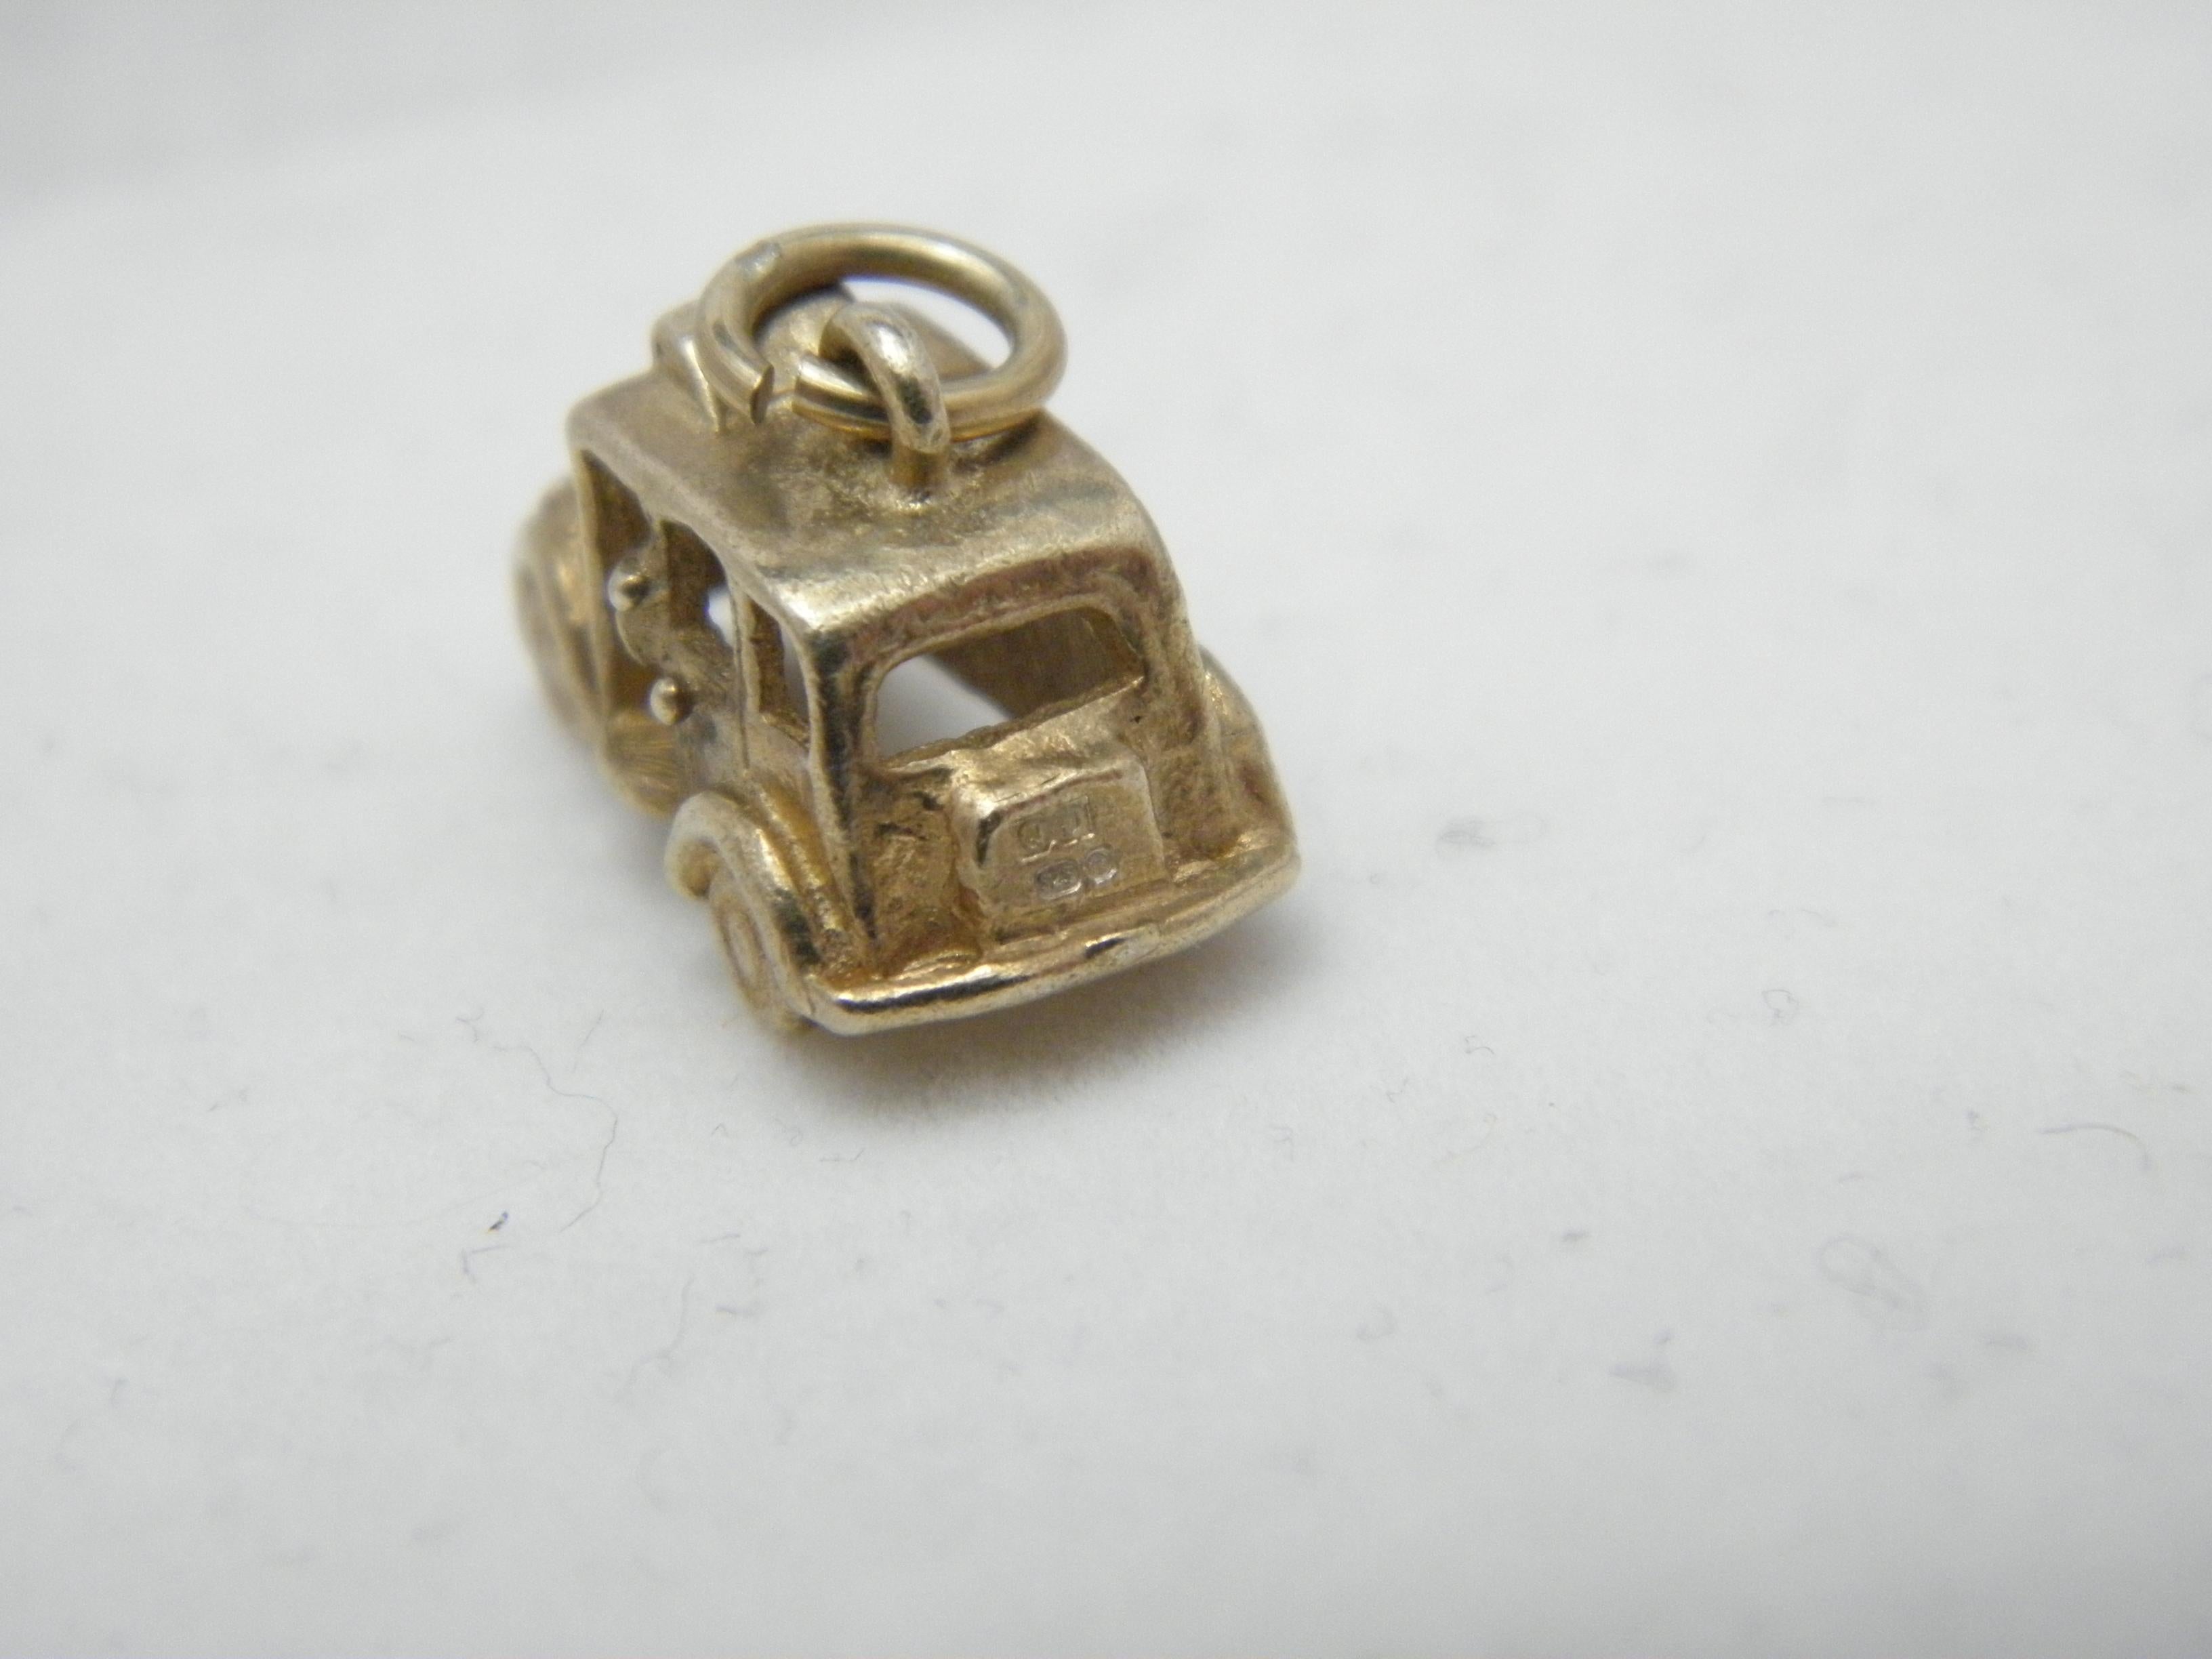 Vintage 9ct Gold London Taxi Pendant Charm Fob c1970 375 Purity Heavy 3.1g For Sale 3